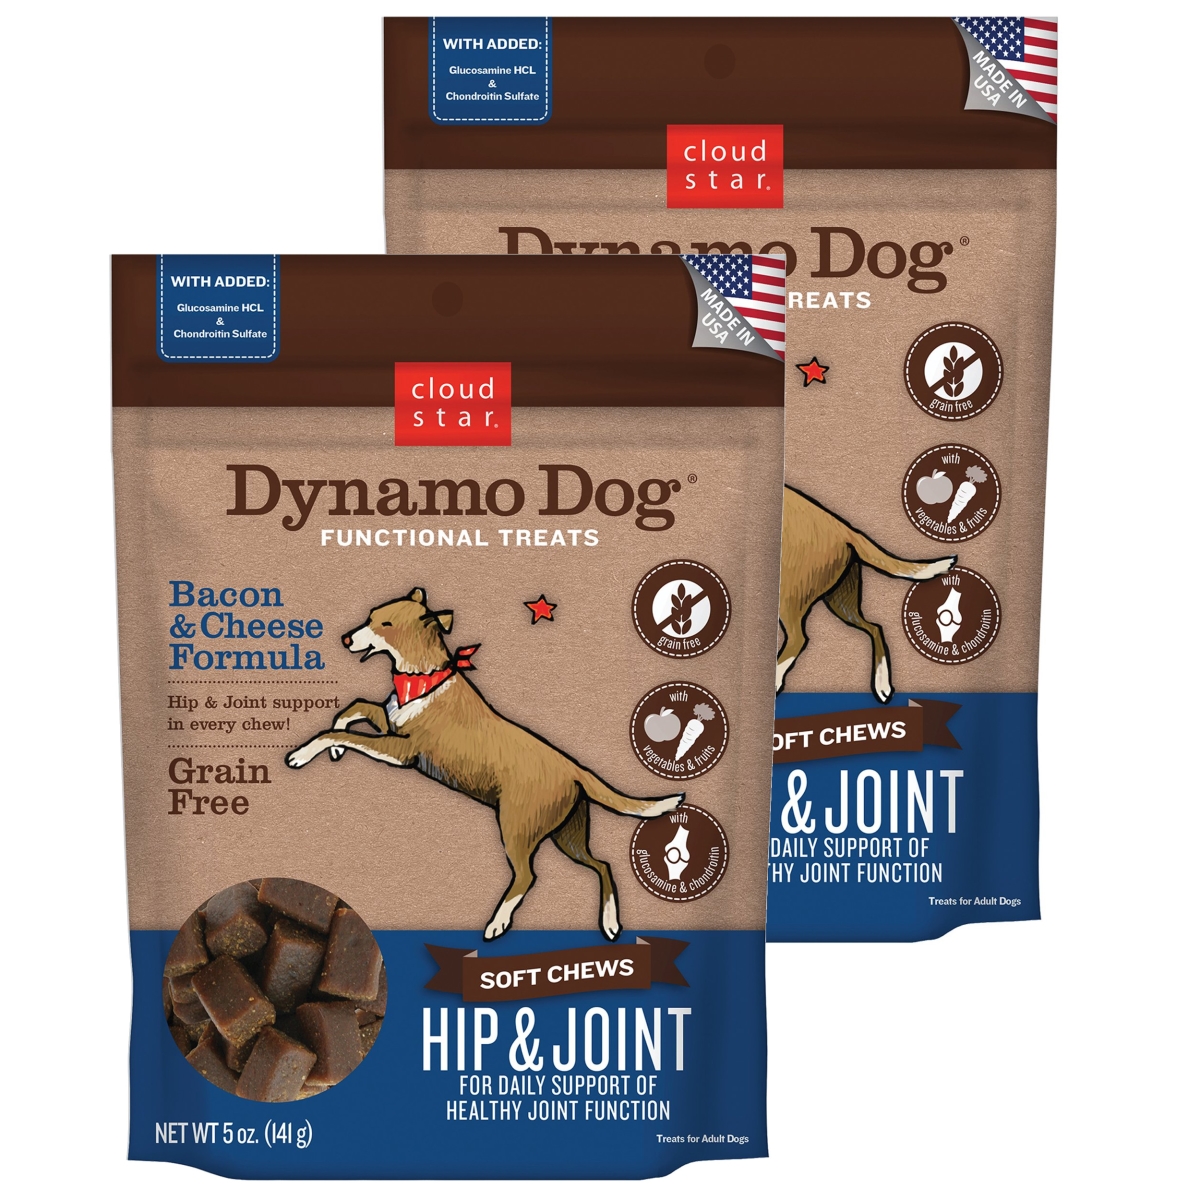 192959800258 5 Oz Dynamo Dog Hip & Joint Bacon & Cheese Functional Treats - Pack Of 2